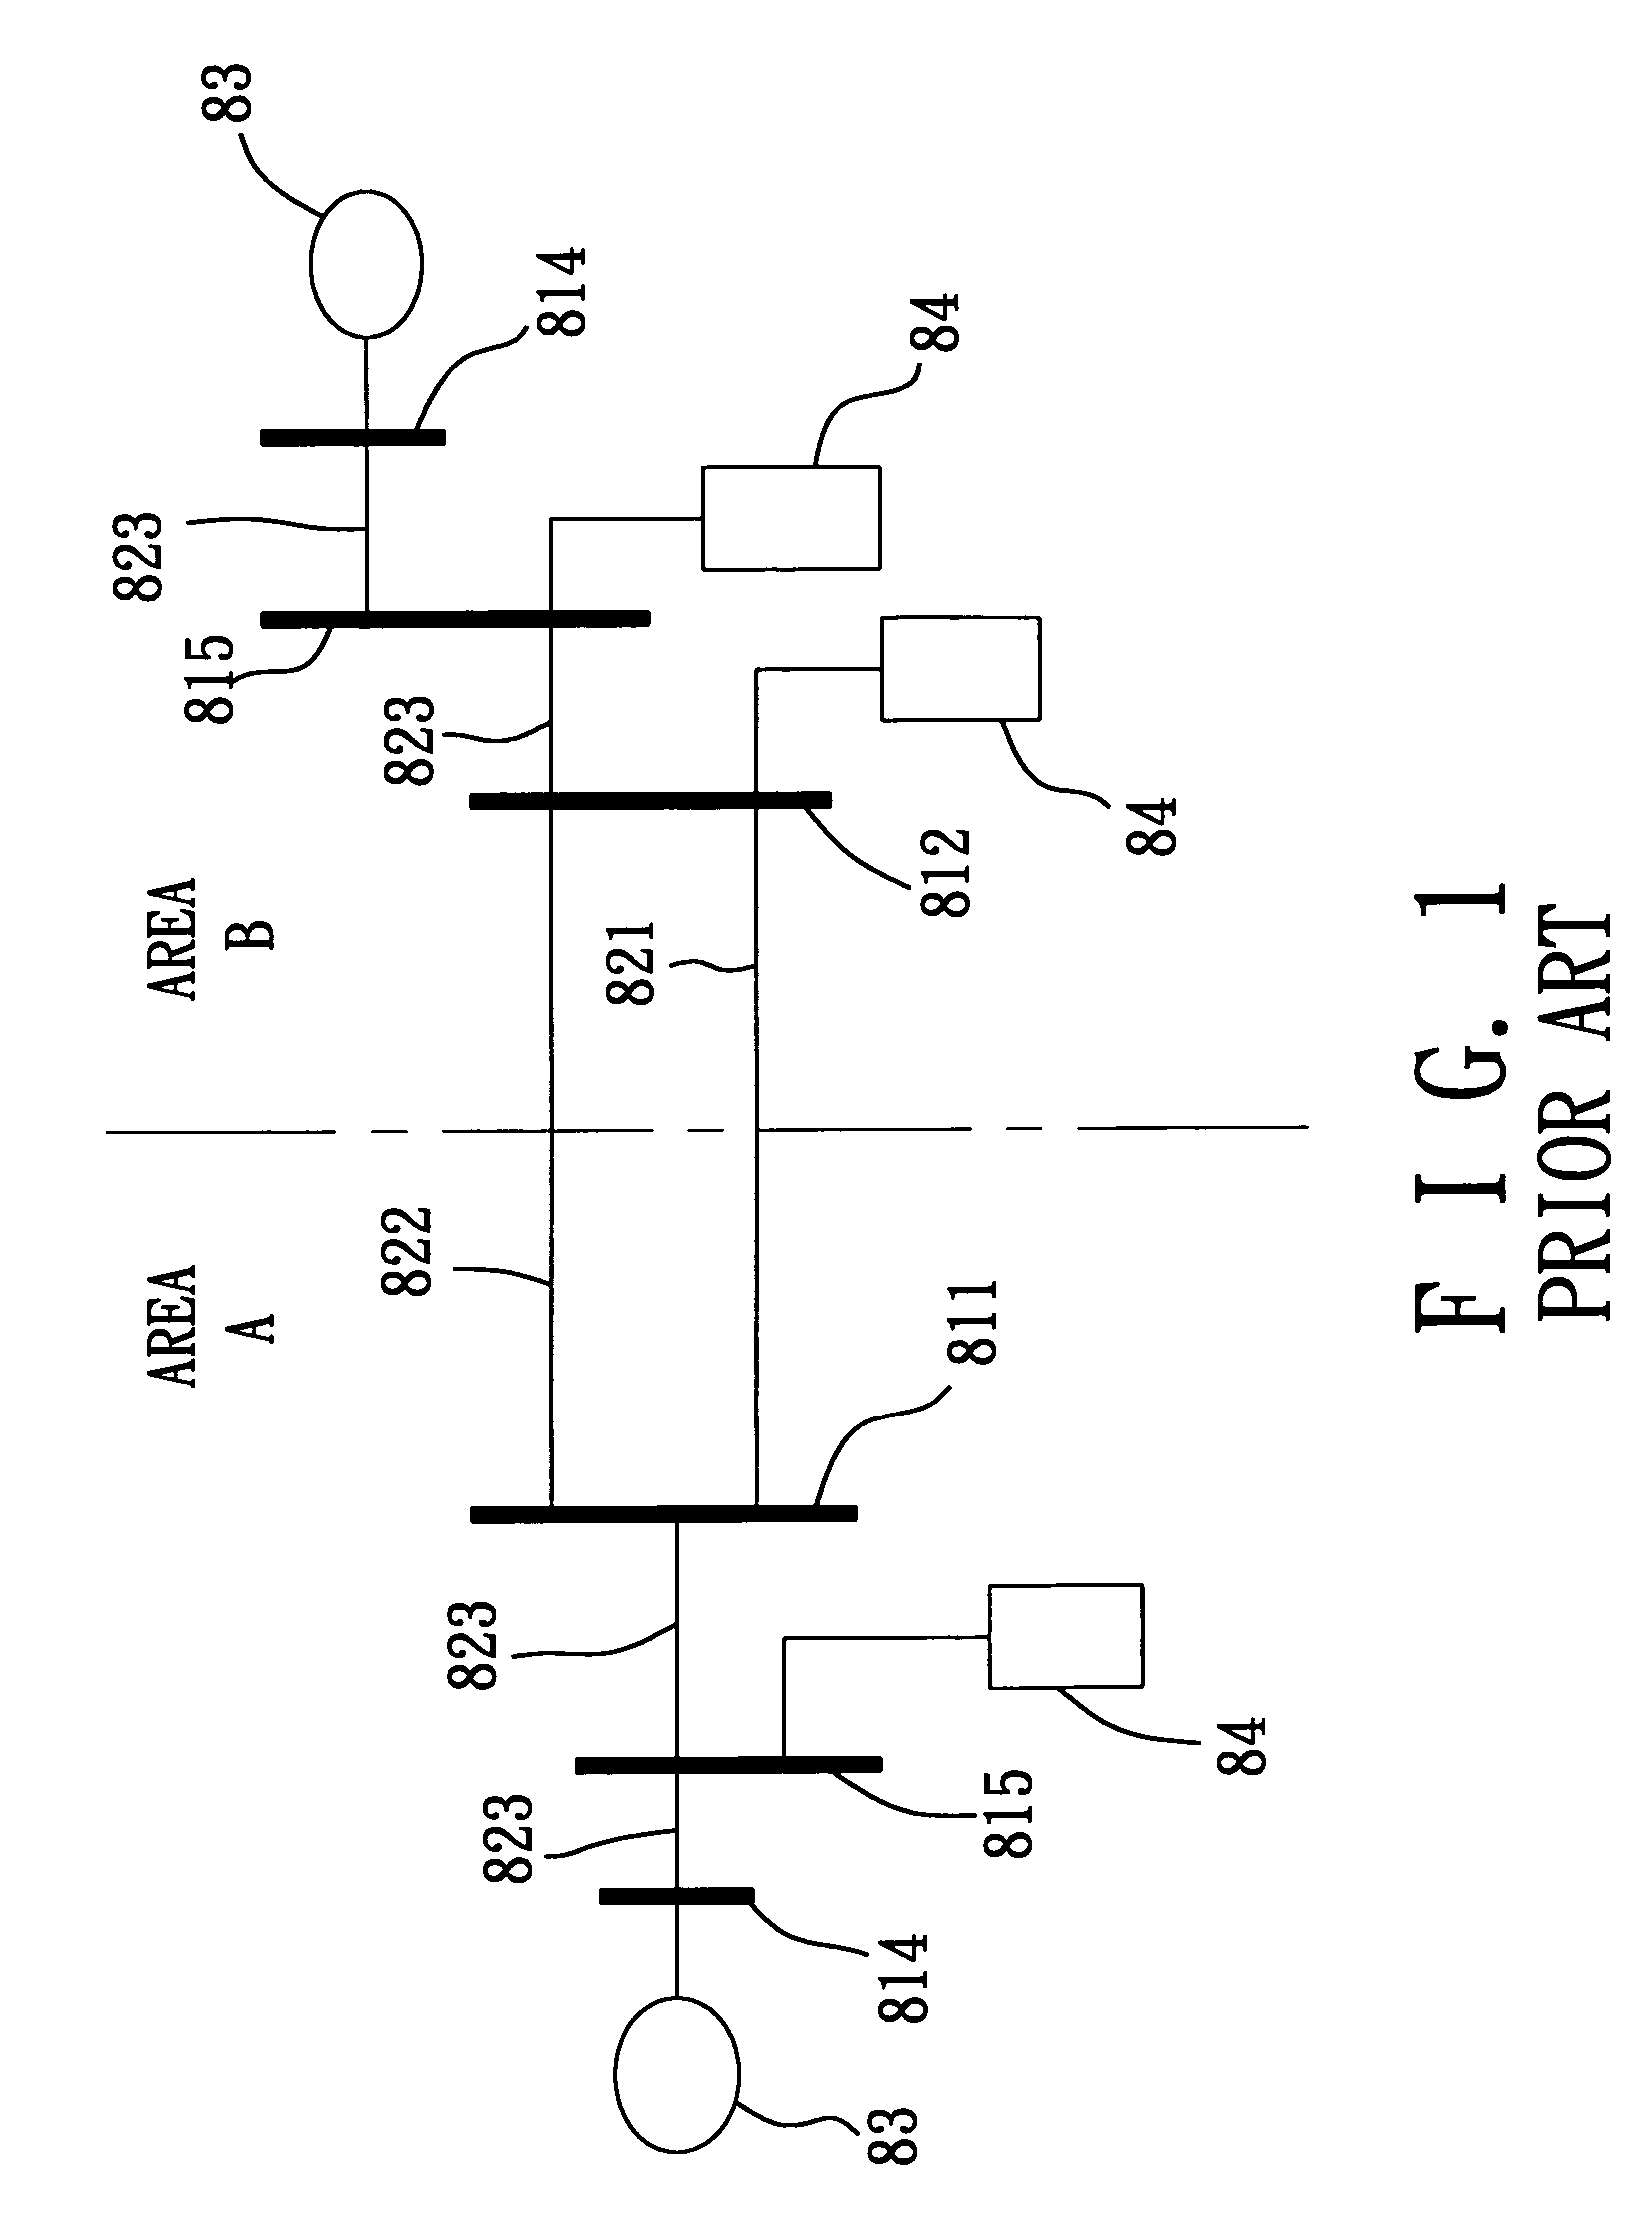 Method for calculating power flow solution of a power transmission network that includes unified power flow controllers